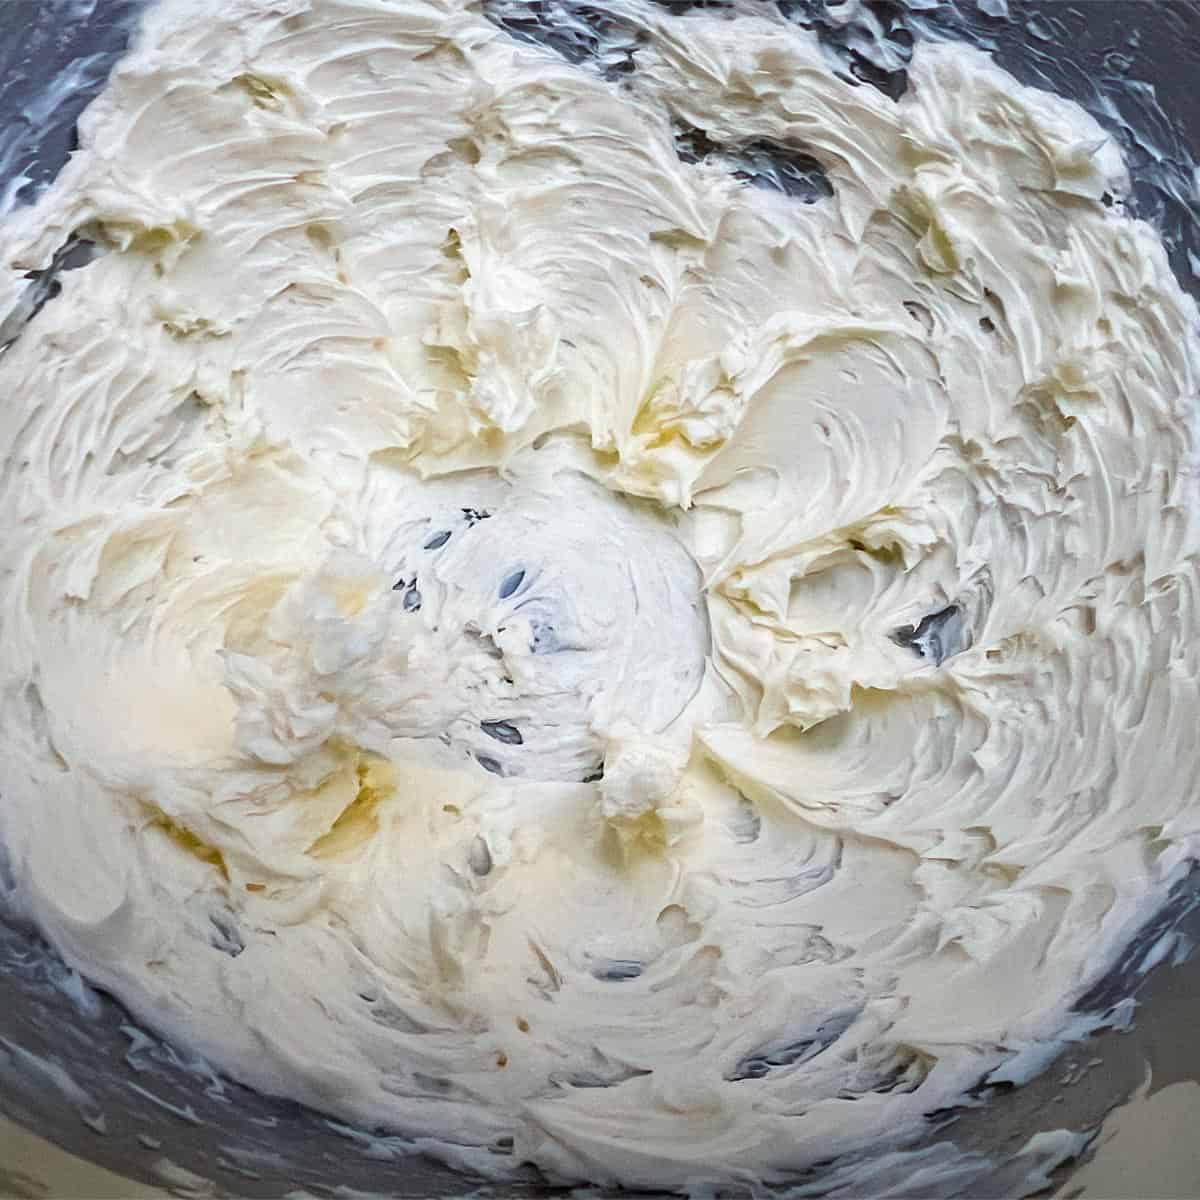 Creamed butter in a mixer bowl with creamy soft peaks.